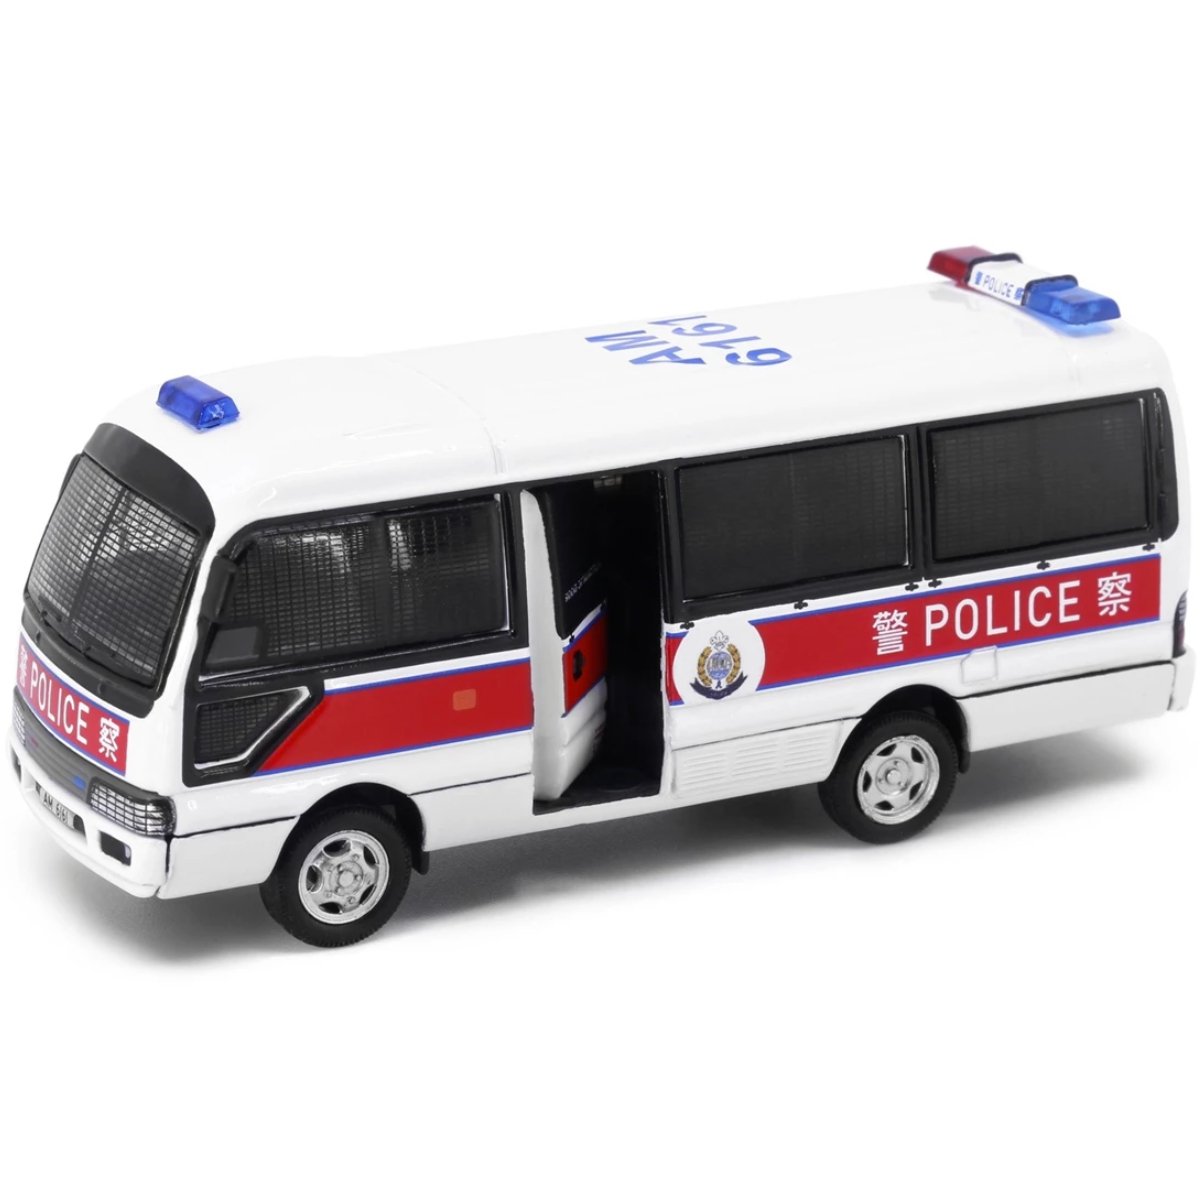 Tiny Models Toyota Coaster Police PTU - With Mesh Window Shields (1:76 Scale) - Phillips Hobbies